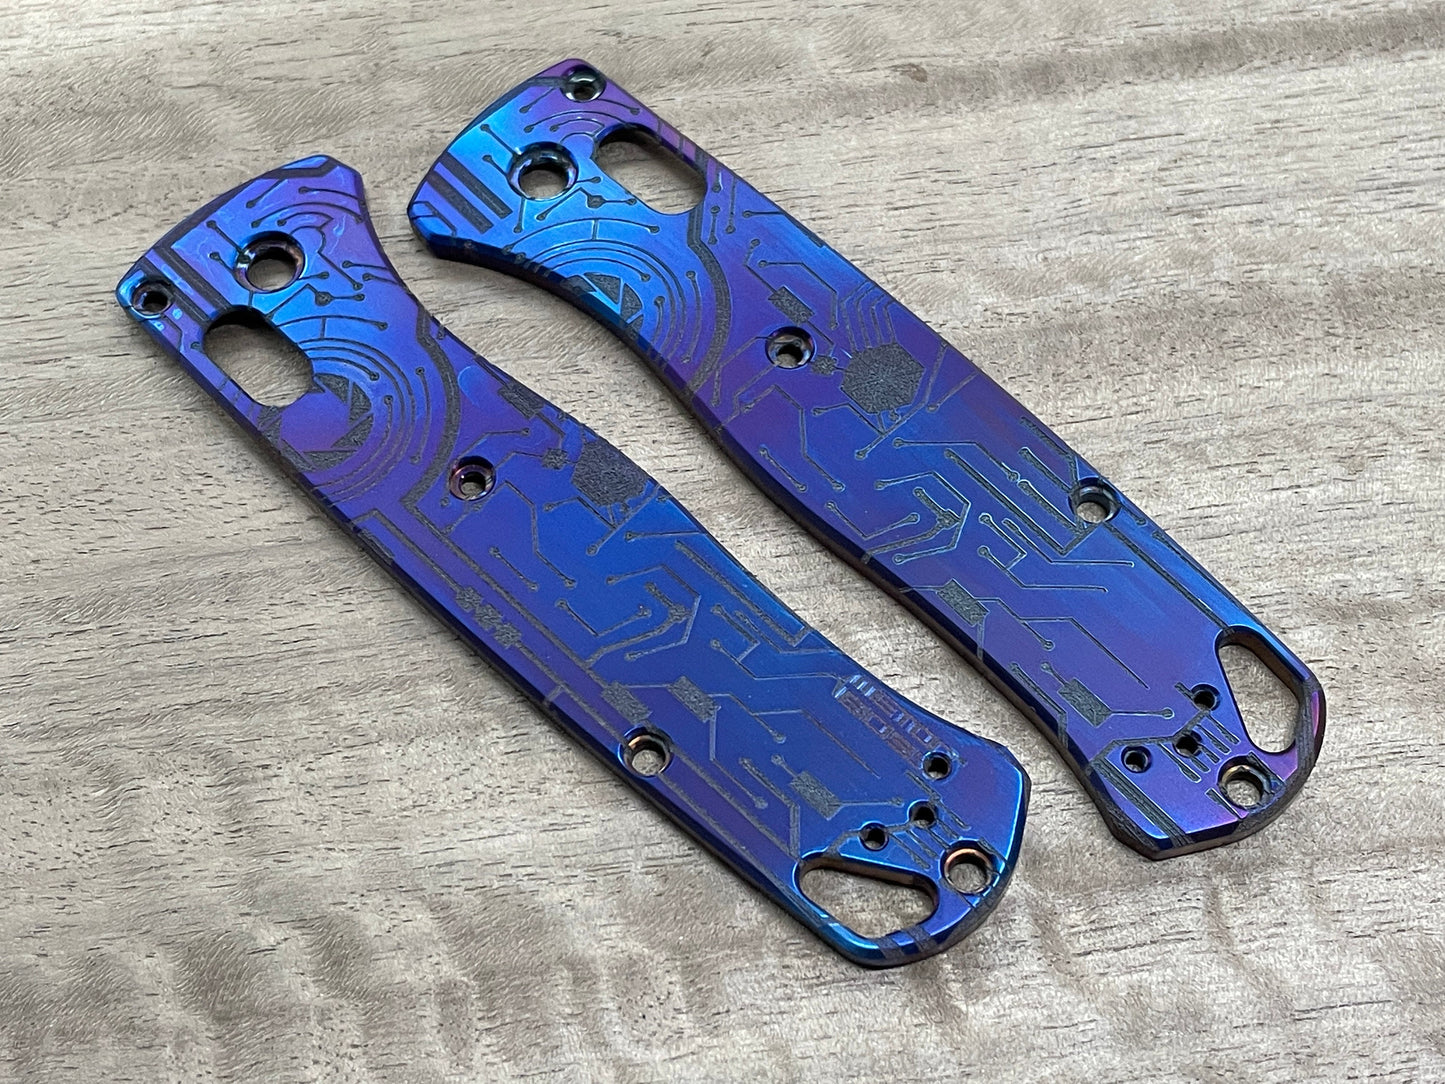 Flamed CIRCUIT BOARD engraved Titanium Scales for Benchmade Bugout 535